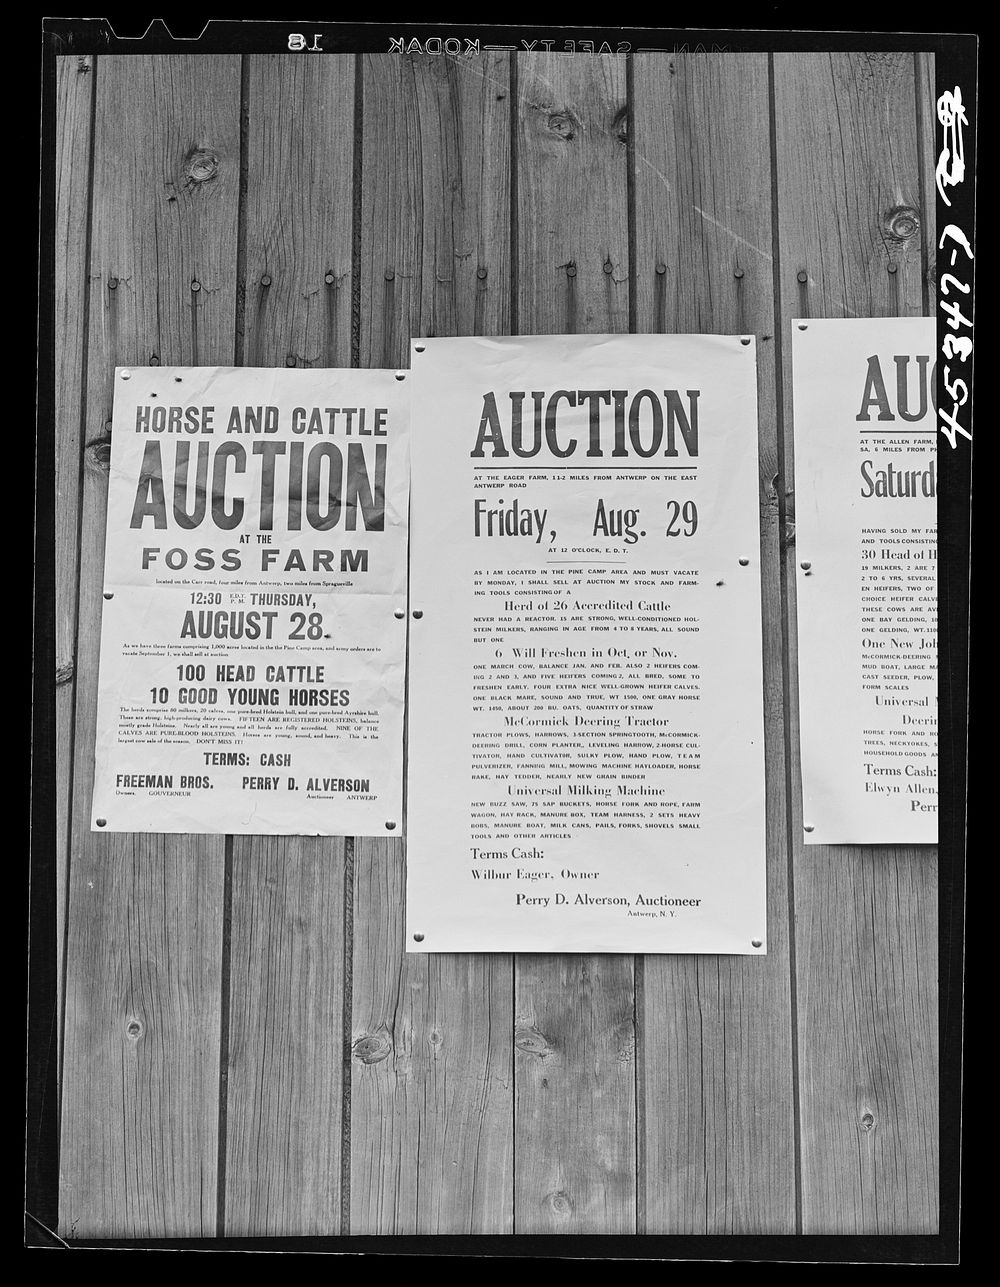 Auction notices of farms in the Pine Camp expansion area posted on a barn at the Ingalls farm near Antwerp, New York.…